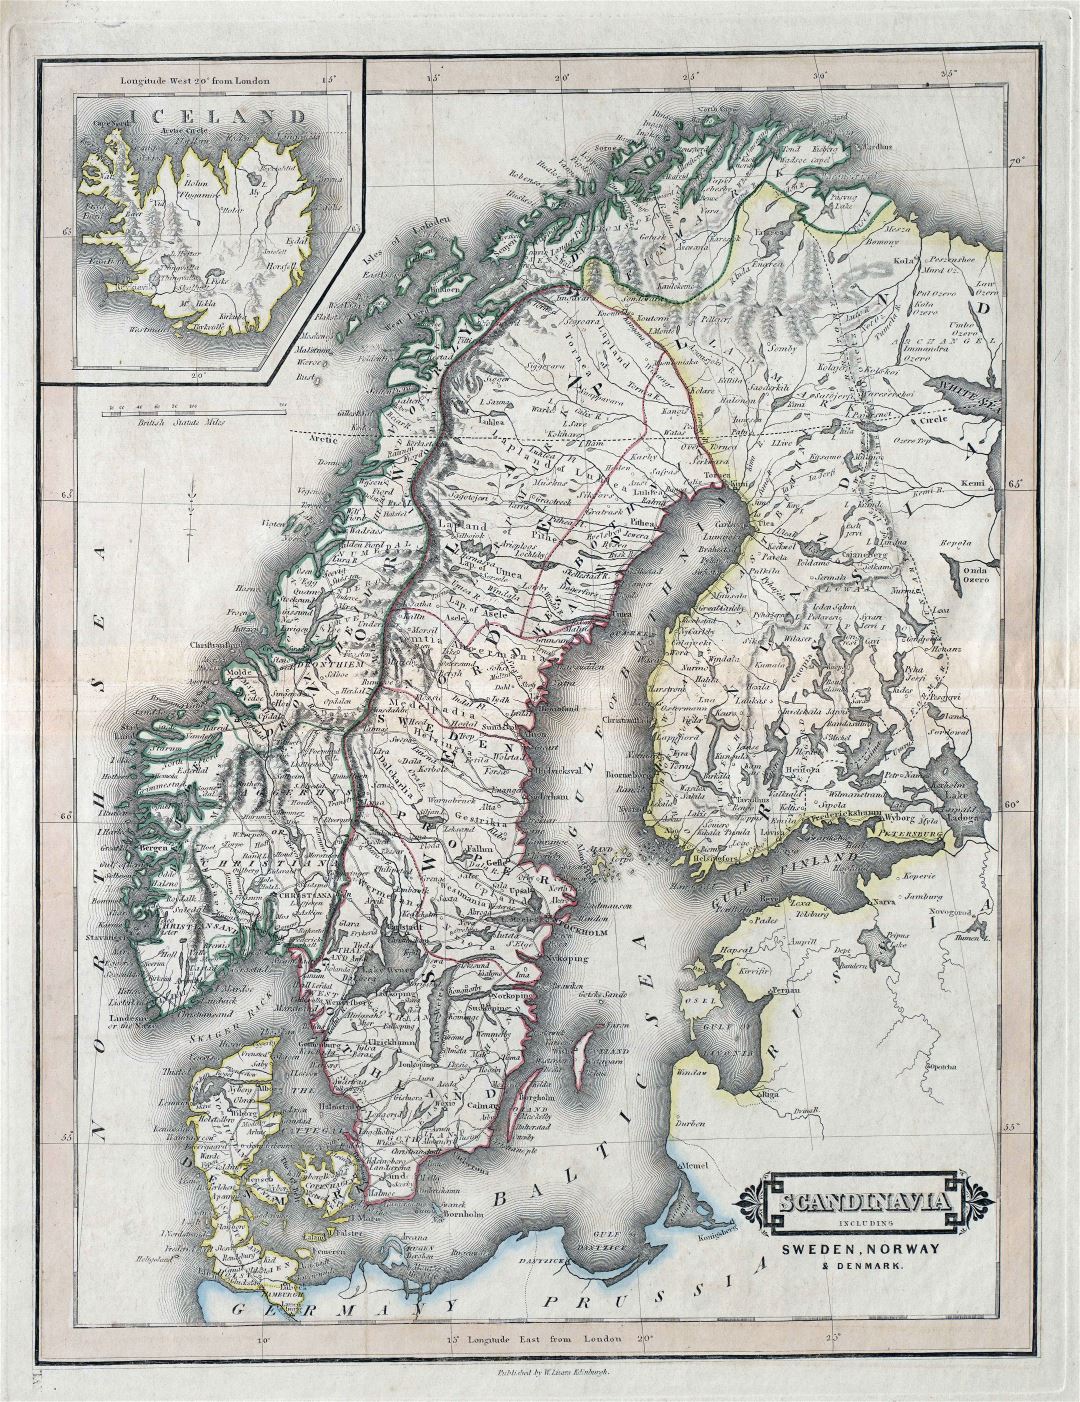 Large scale old political map of Sweden, Norway and Denmark with roads and cities